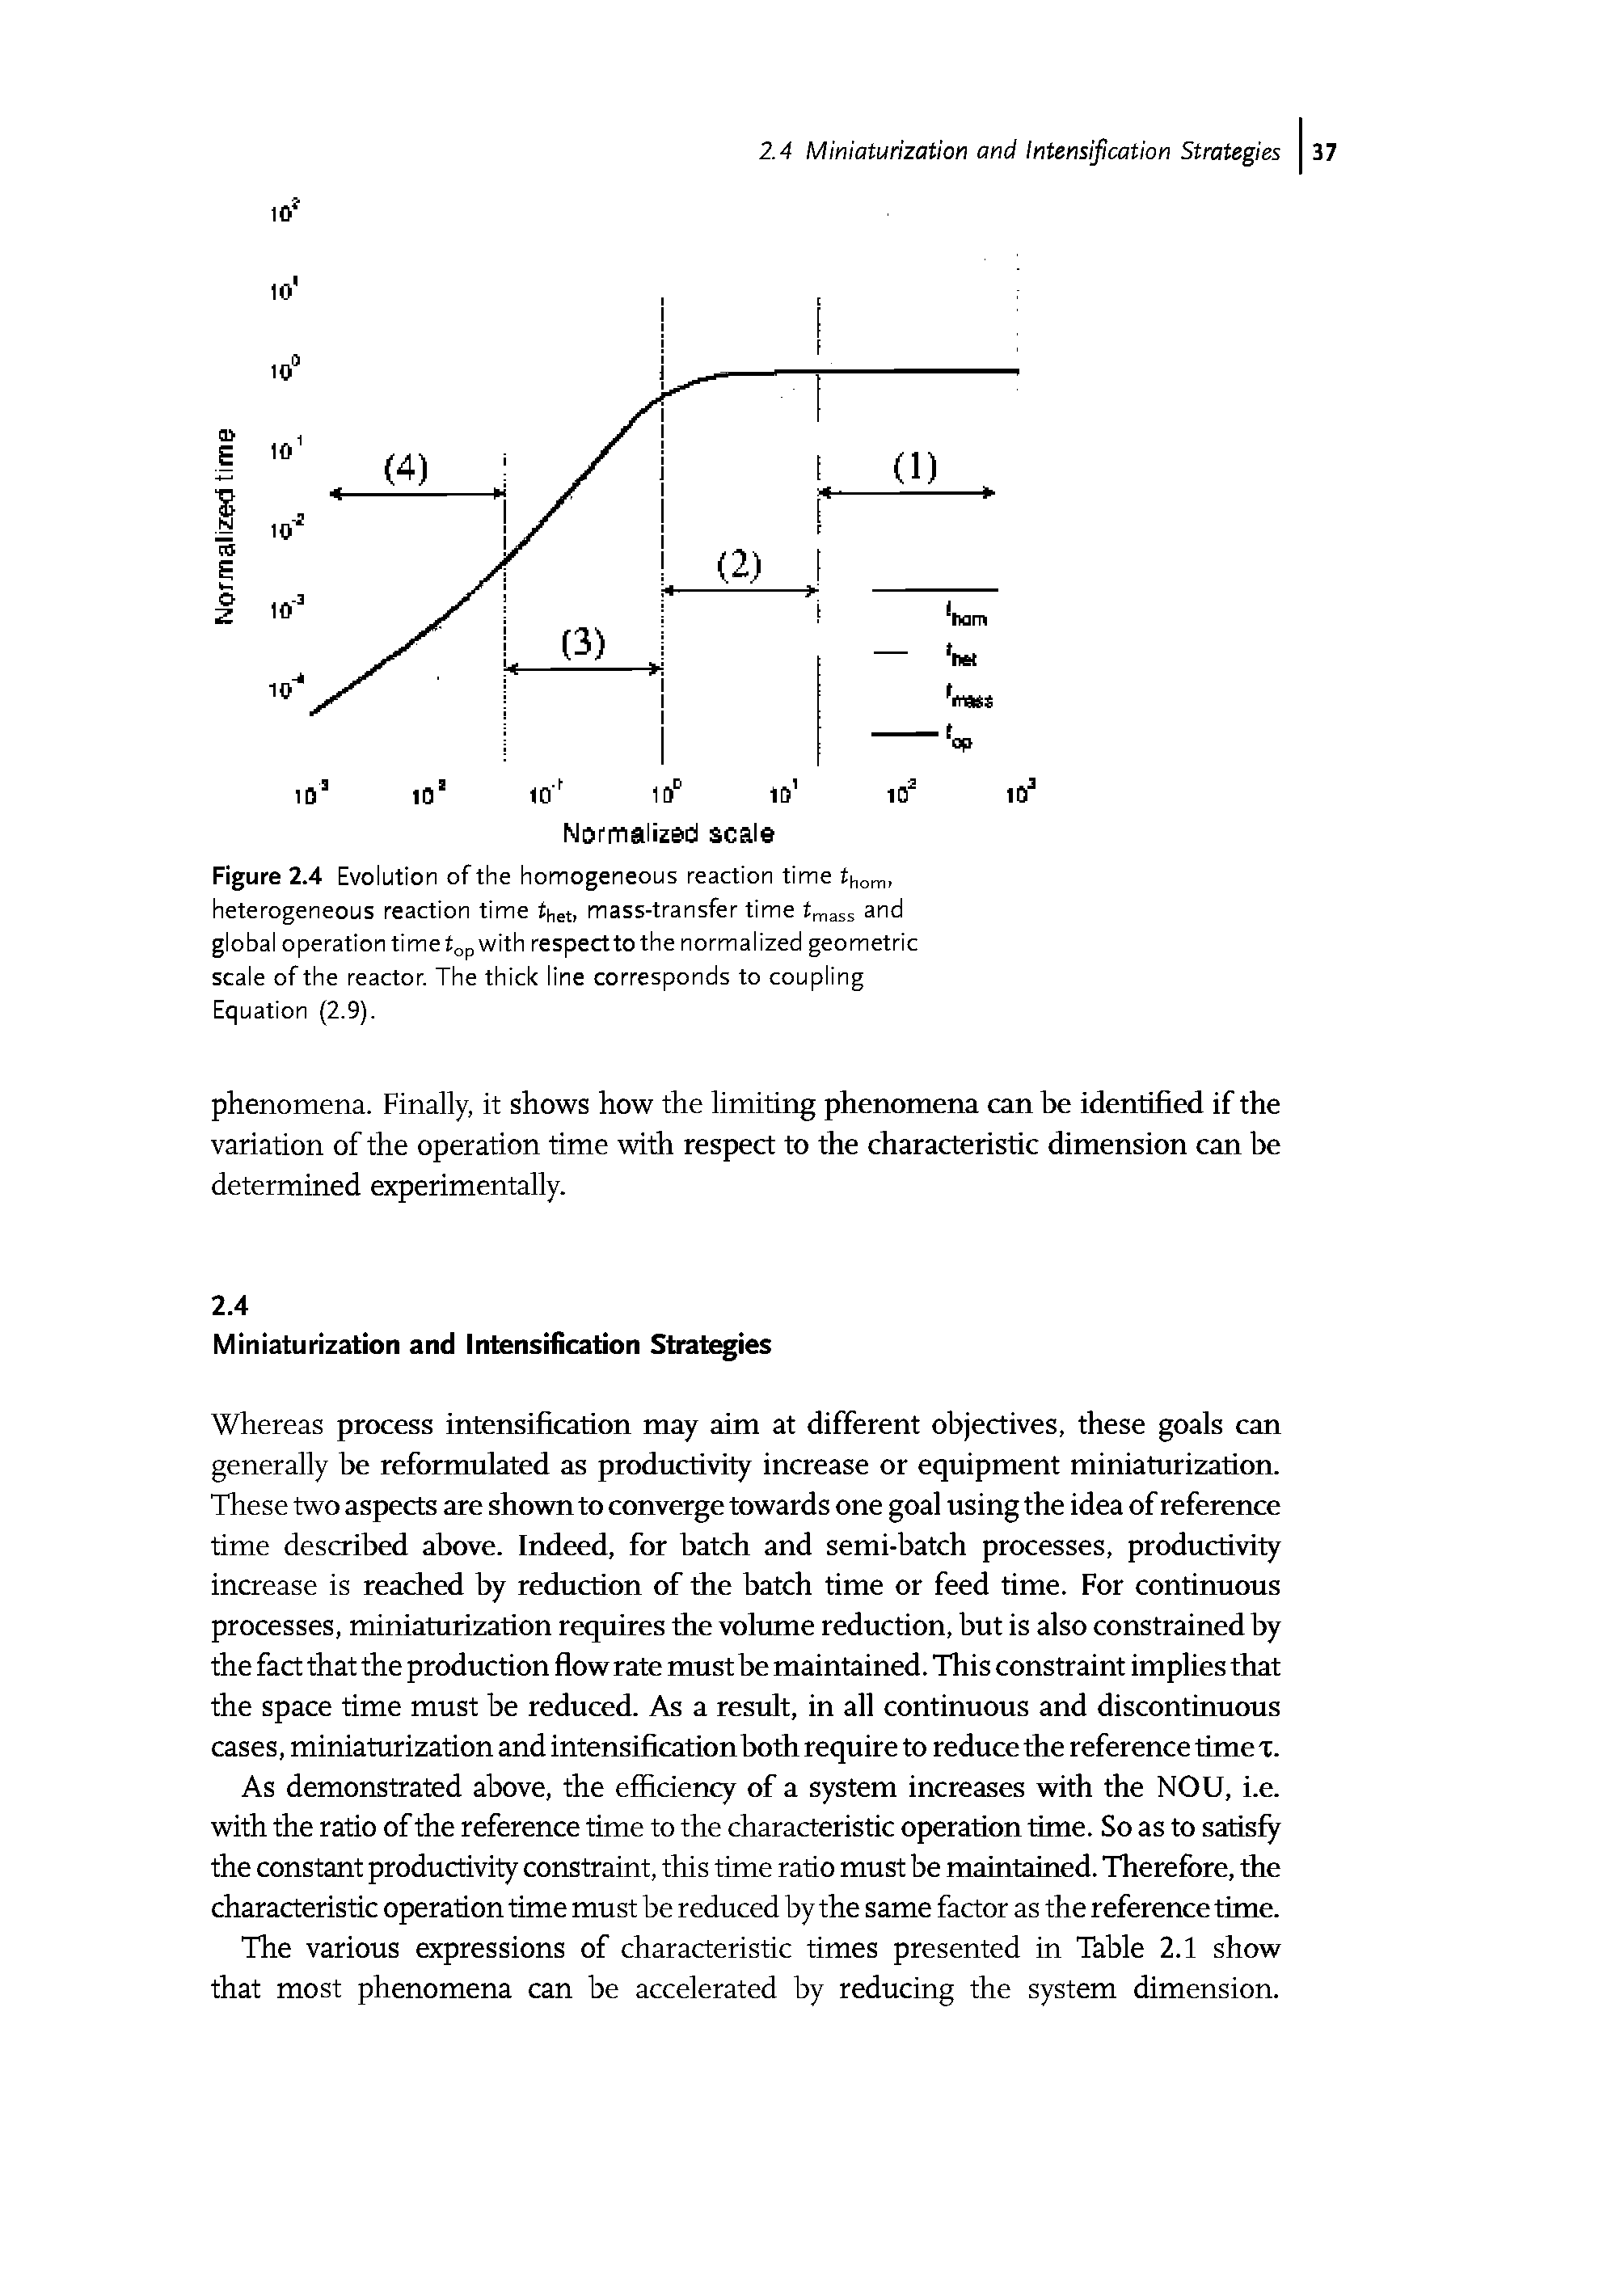 Figure 2.4 Evolution of the homogeneous reaction time thom, heterogeneous reaction time thet, mass-transfer time tmass and global operation time top with respect to the normalized geometric scale of the reactor. The thick line corresponds to coupling Equation (2.9).